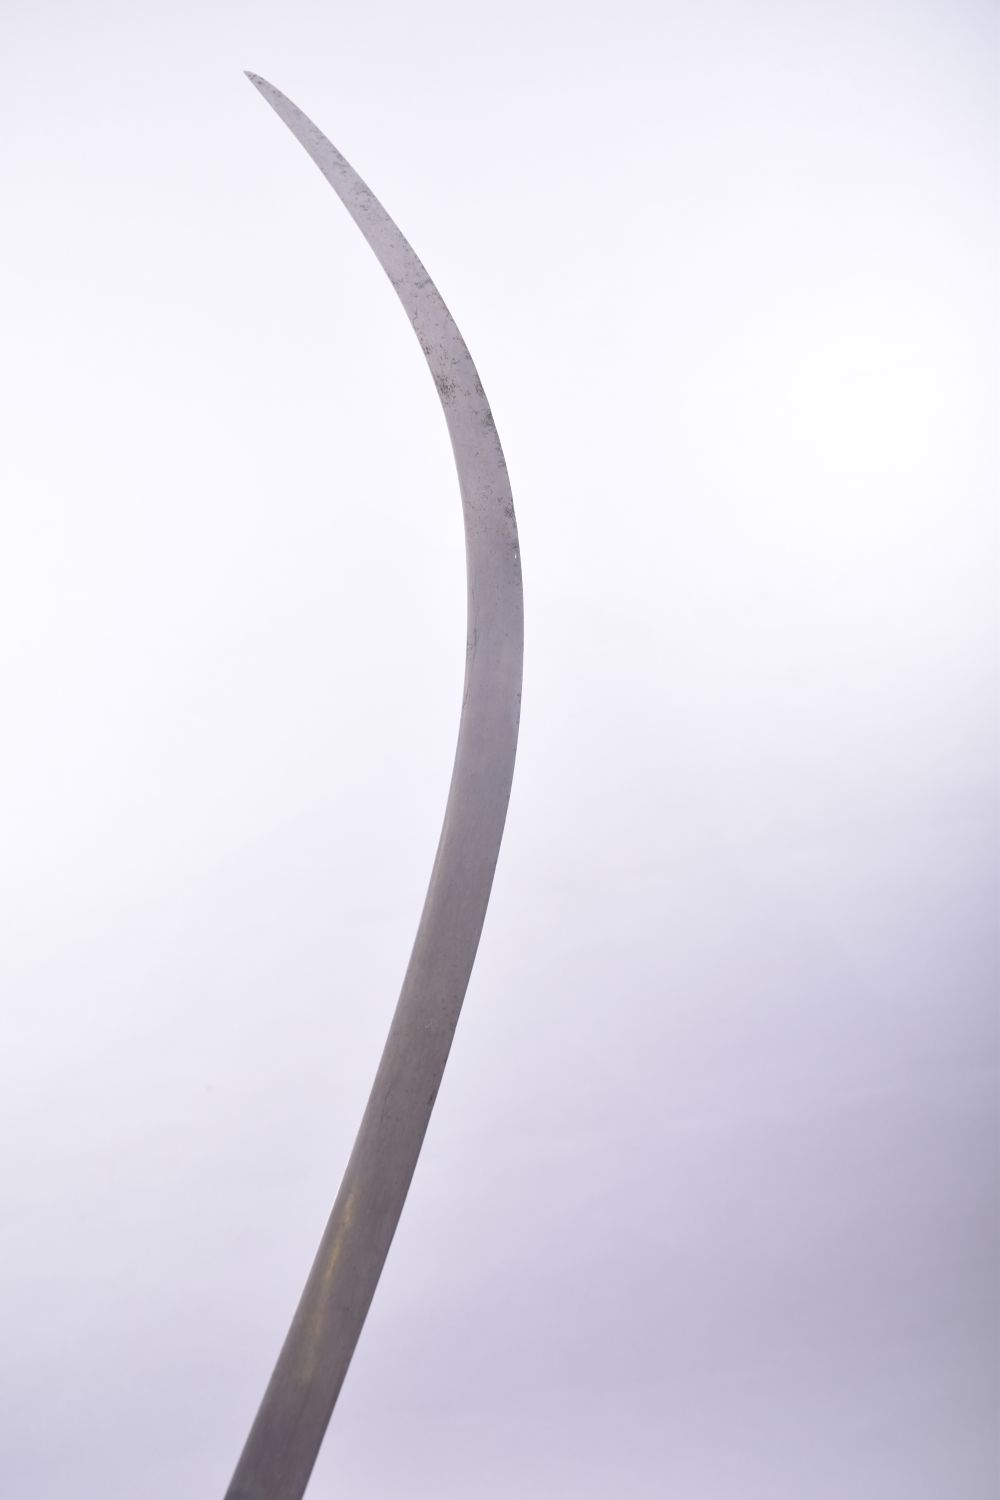 A FINE INDO PERSIAN SHAMSHIR SWORD with watered steel blade and cross guard, with bone handle, - Image 2 of 6